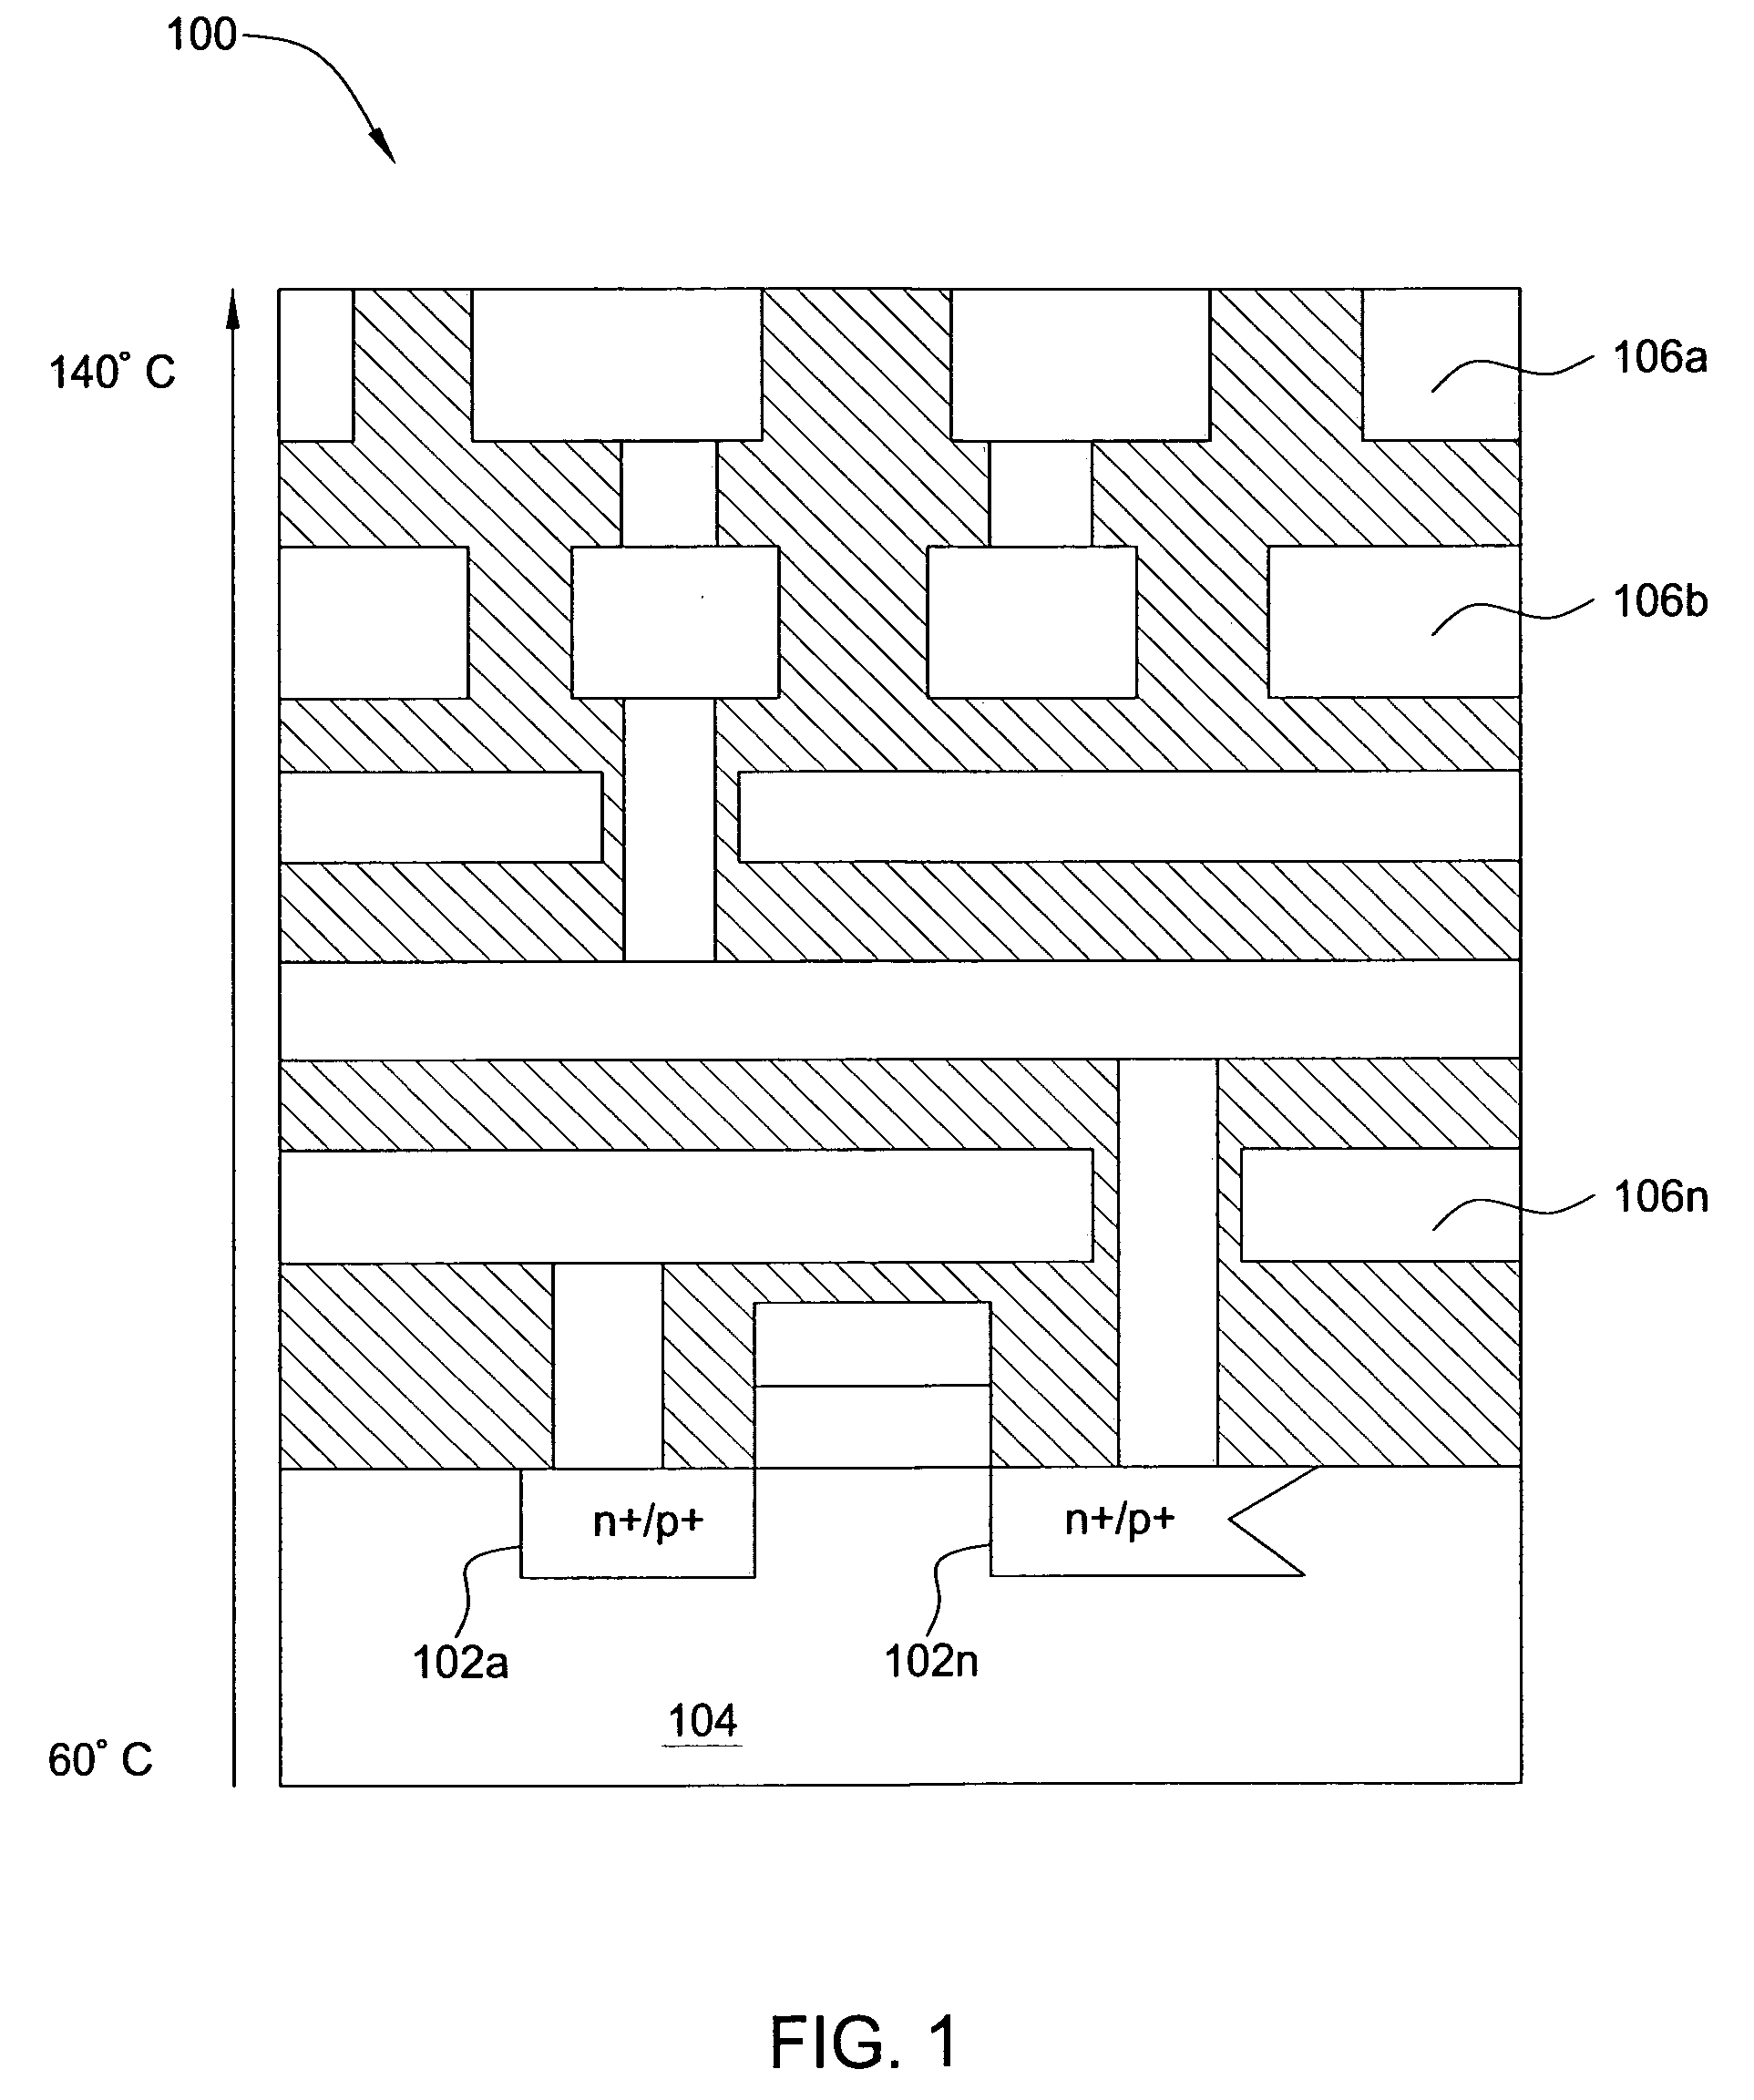 Method and apparatus for thermal modeling and analysis of semiconductor chip designs